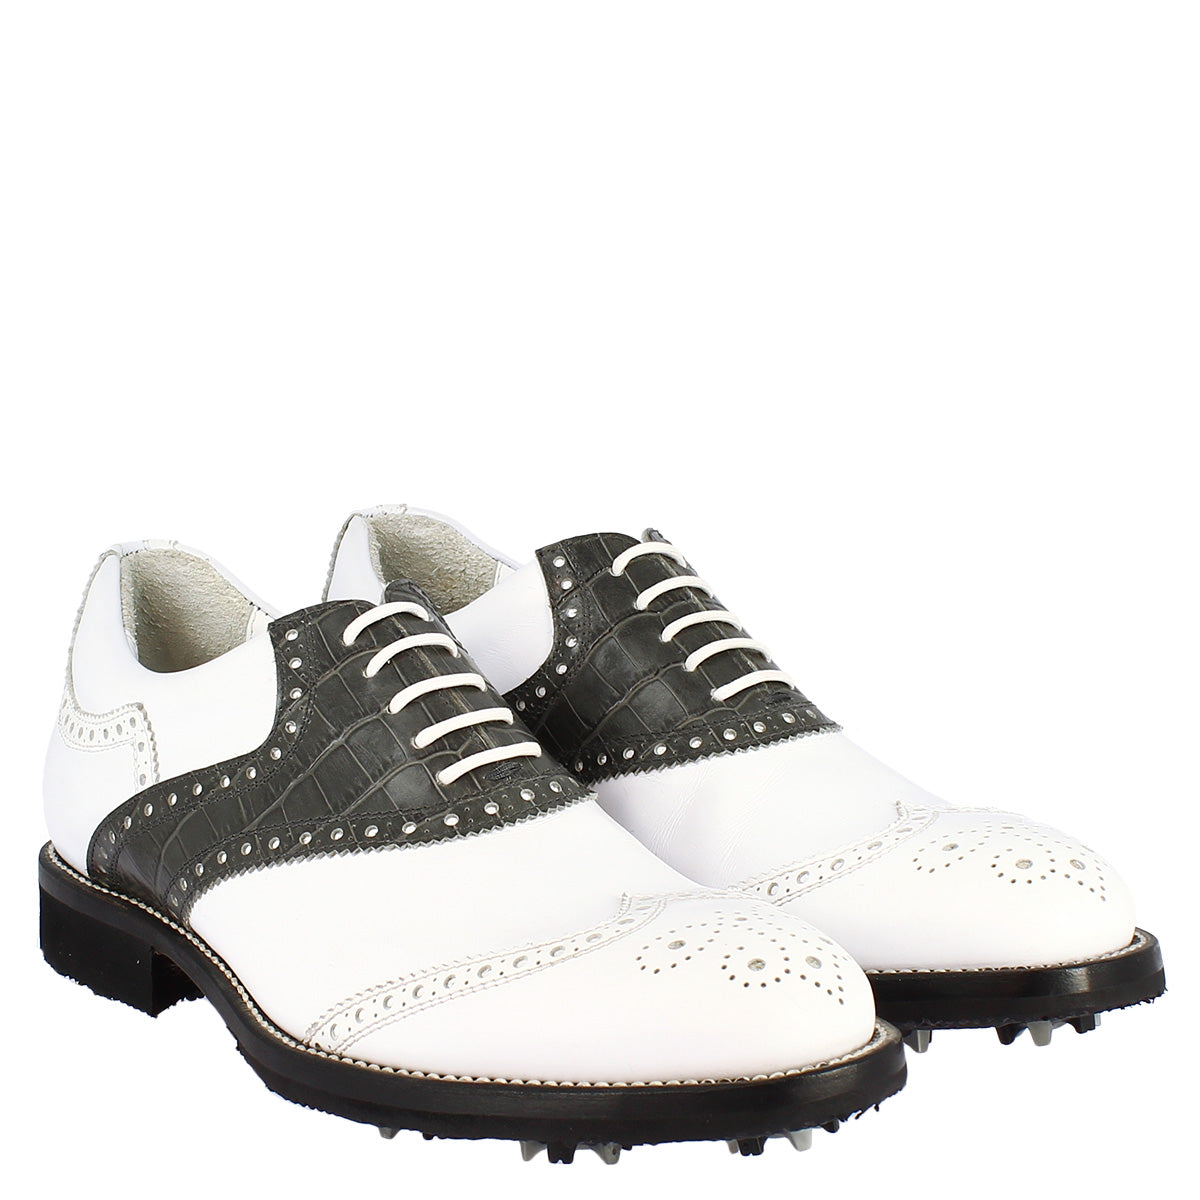 Handcrafted classic men's golf shoes in white grey leather